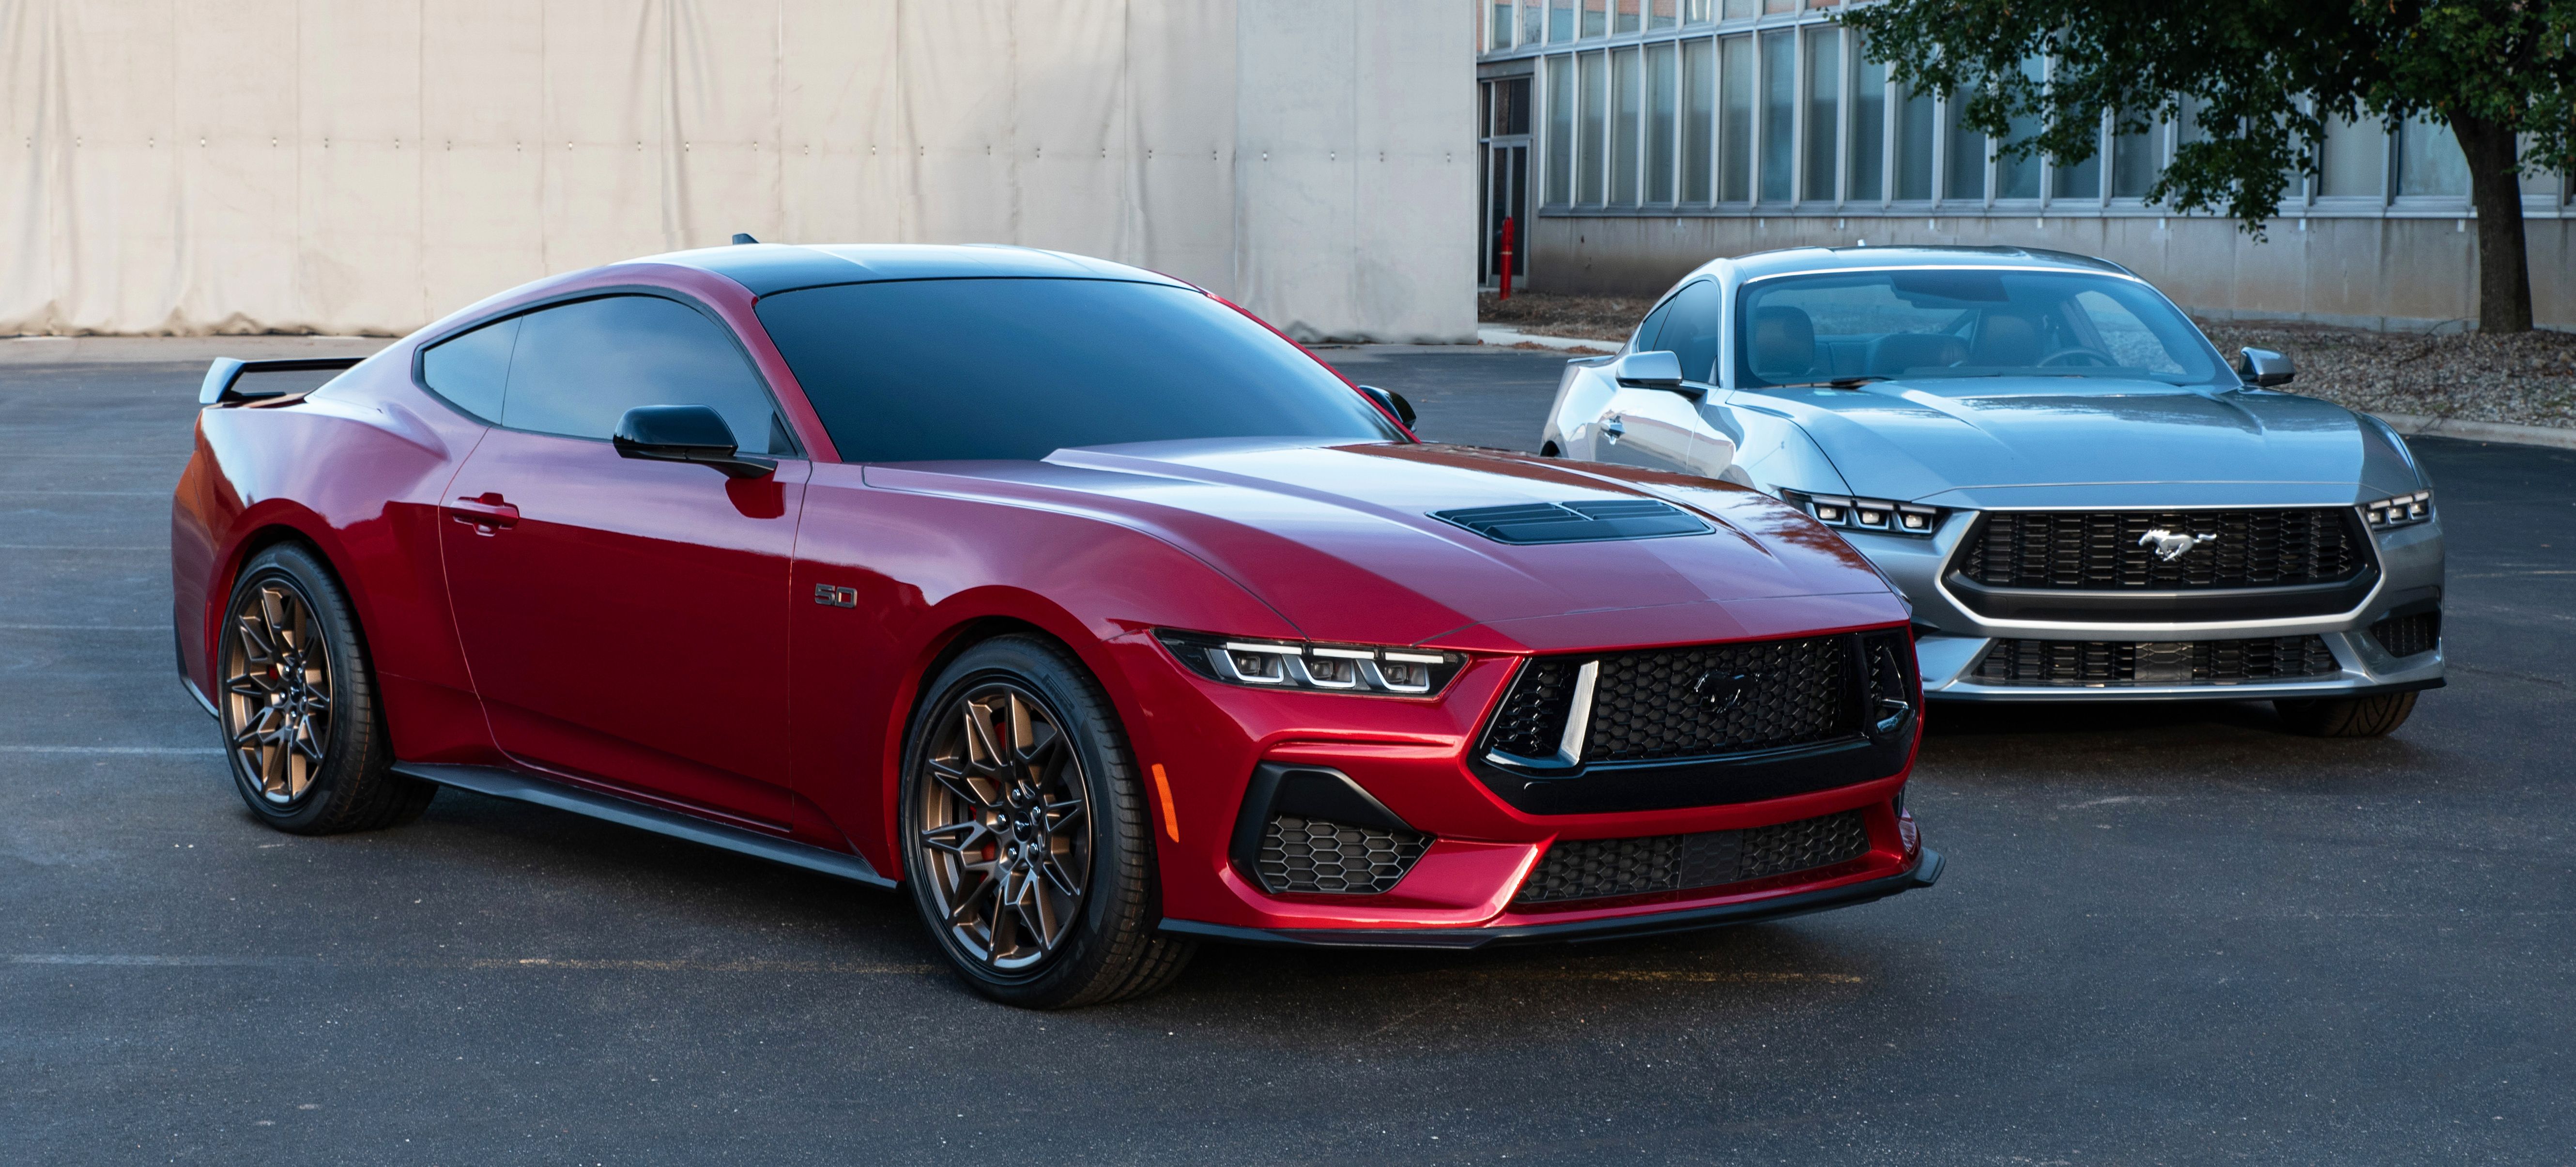 Ford Mustang Exterior.